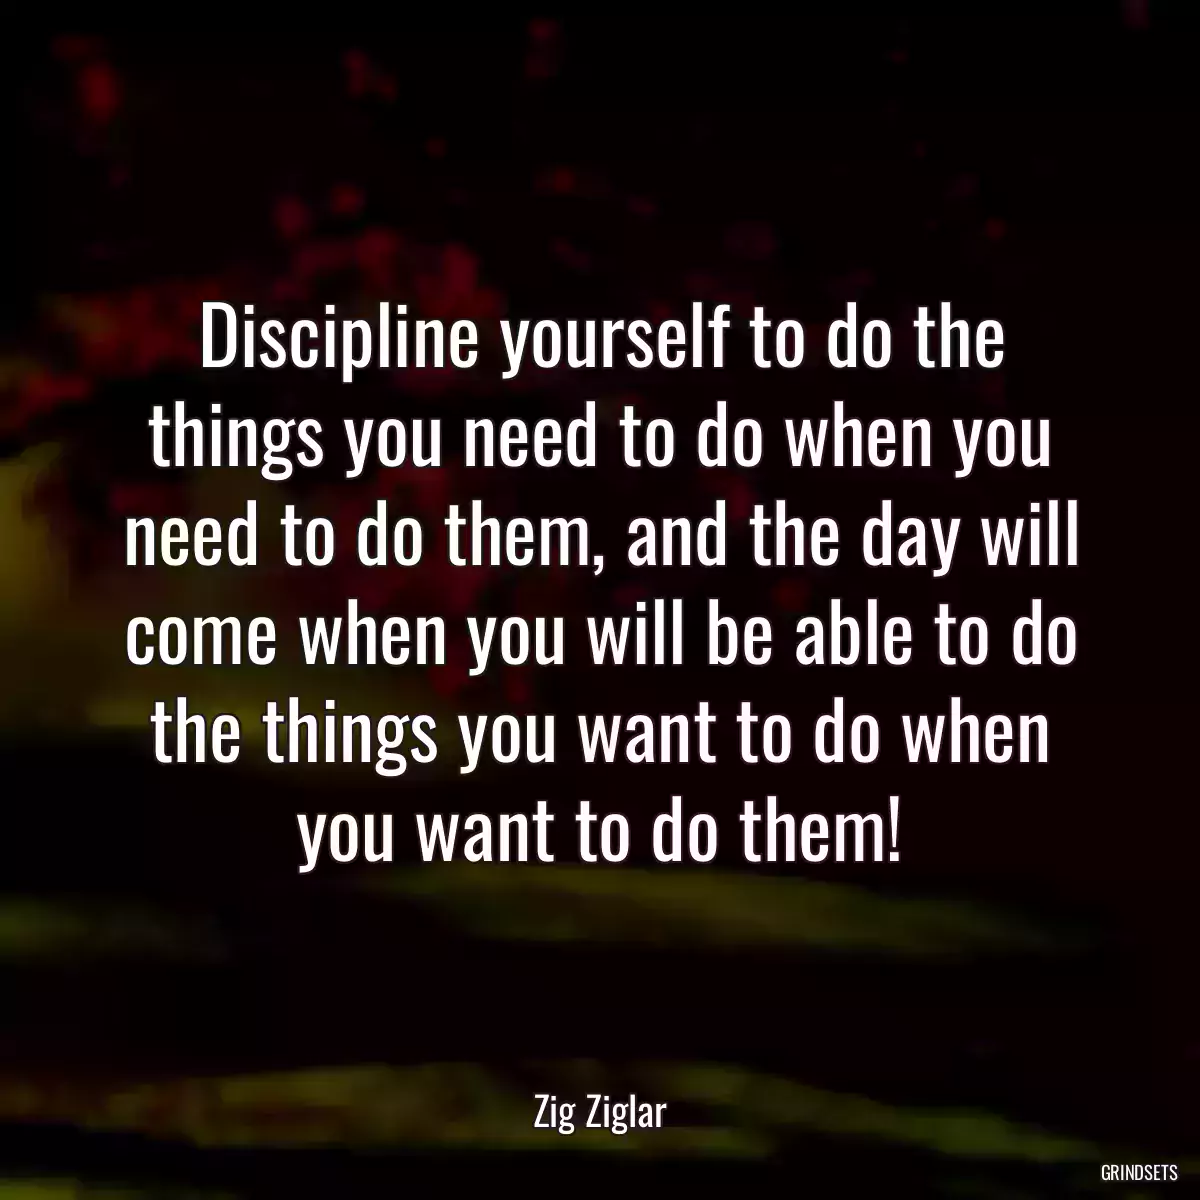 Discipline yourself to do the things you need to do when you need to do them, and the day will come when you will be able to do the things you want to do when you want to do them!